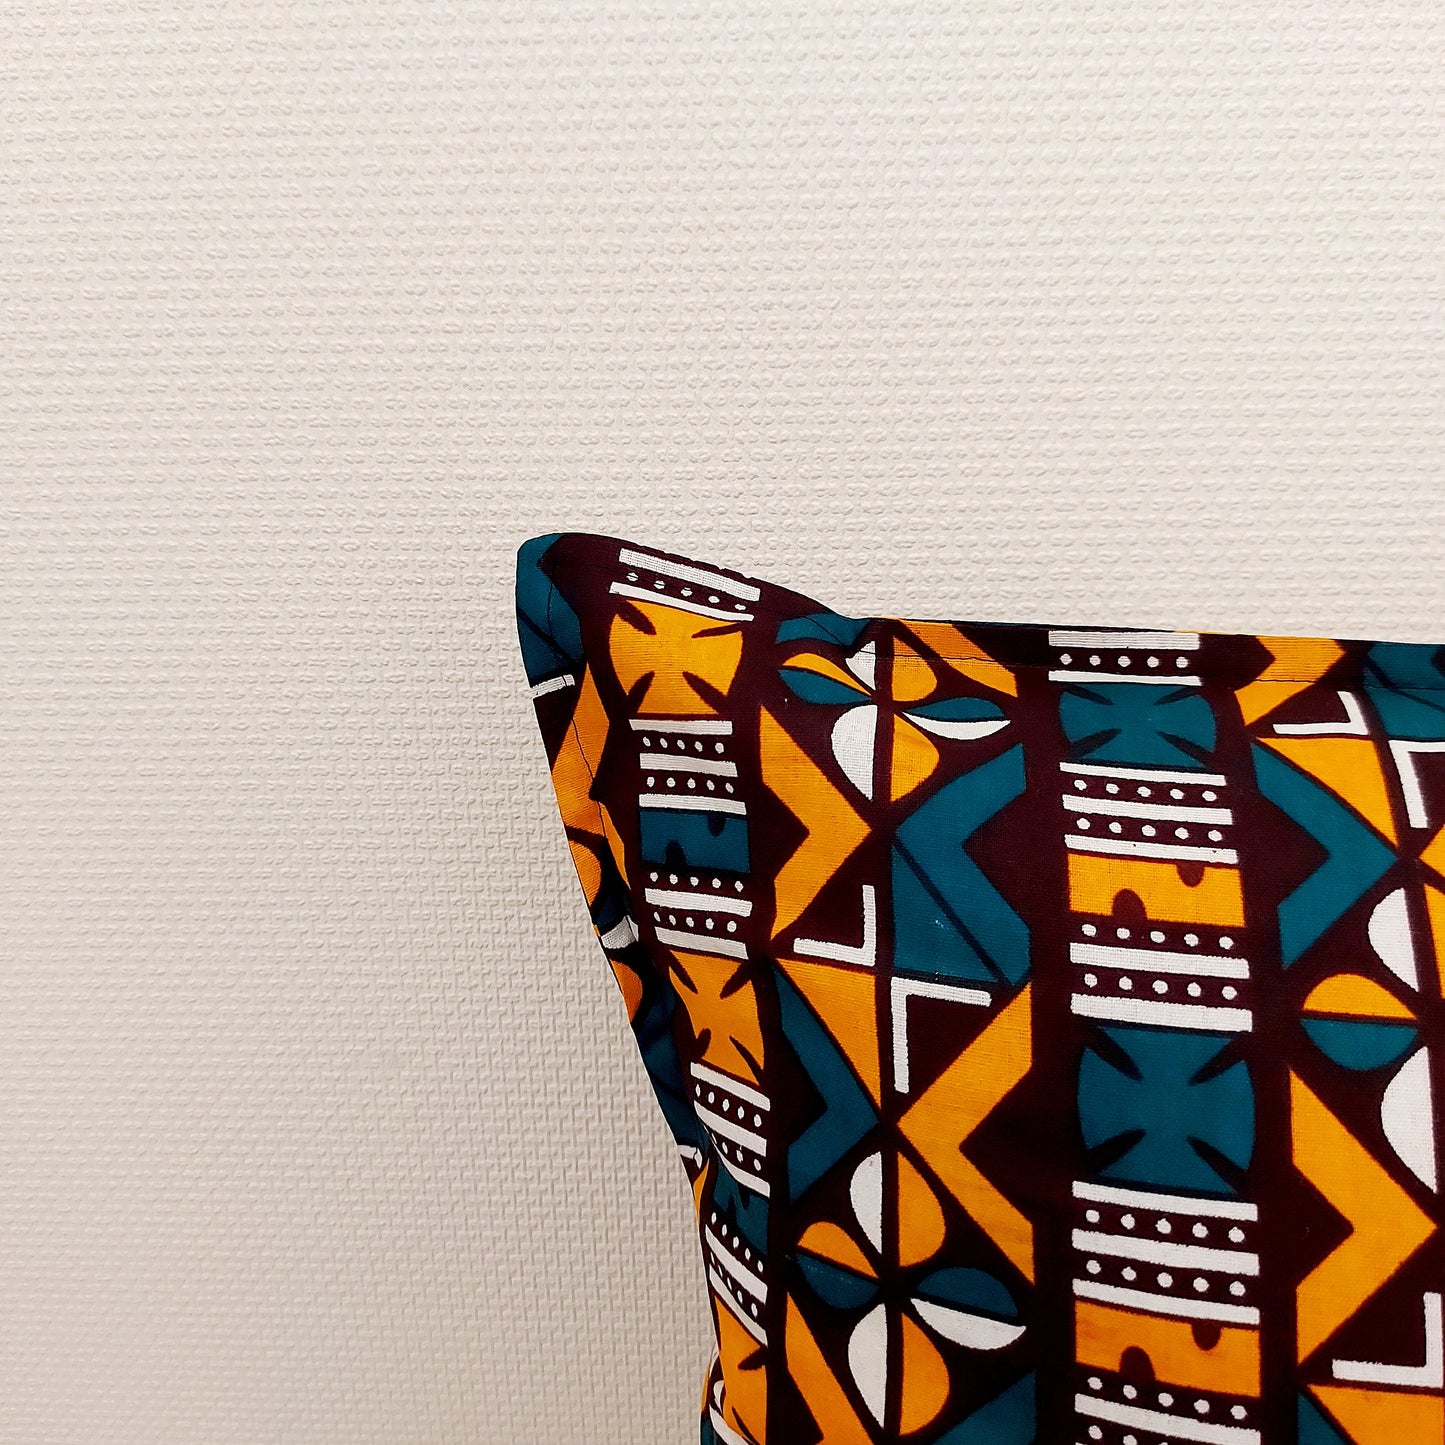 African Print Cushion Cover made from 100% Mudcloth Bogolan Inspired Print Cotton